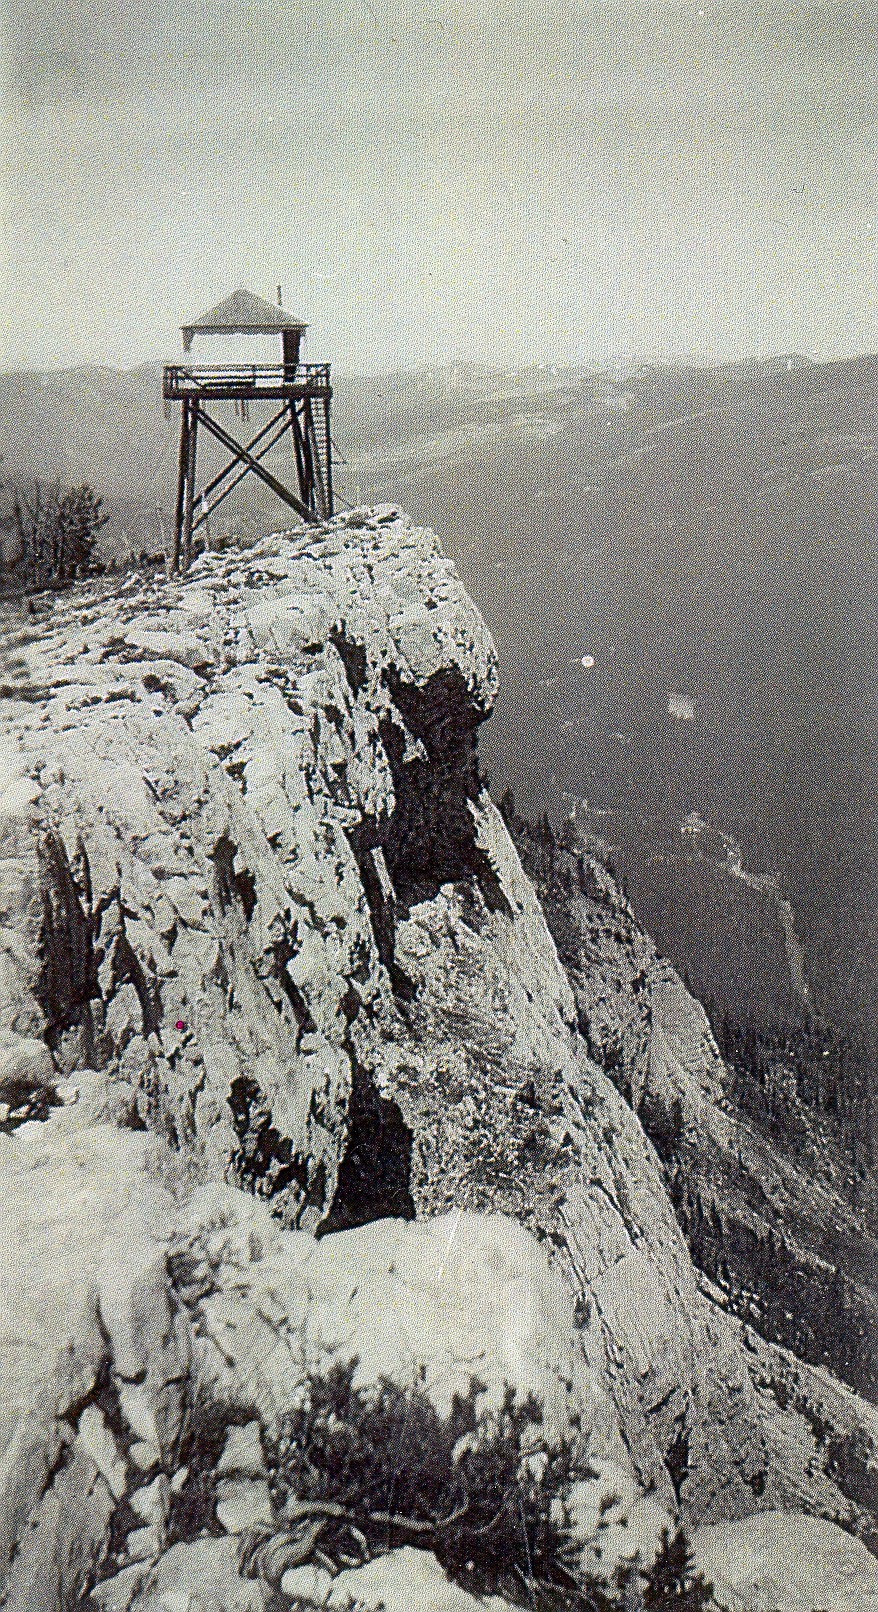 The Limestone Lookout sits high above the valley below. (photo courtesy of the Northwest Montana Lookout Association)